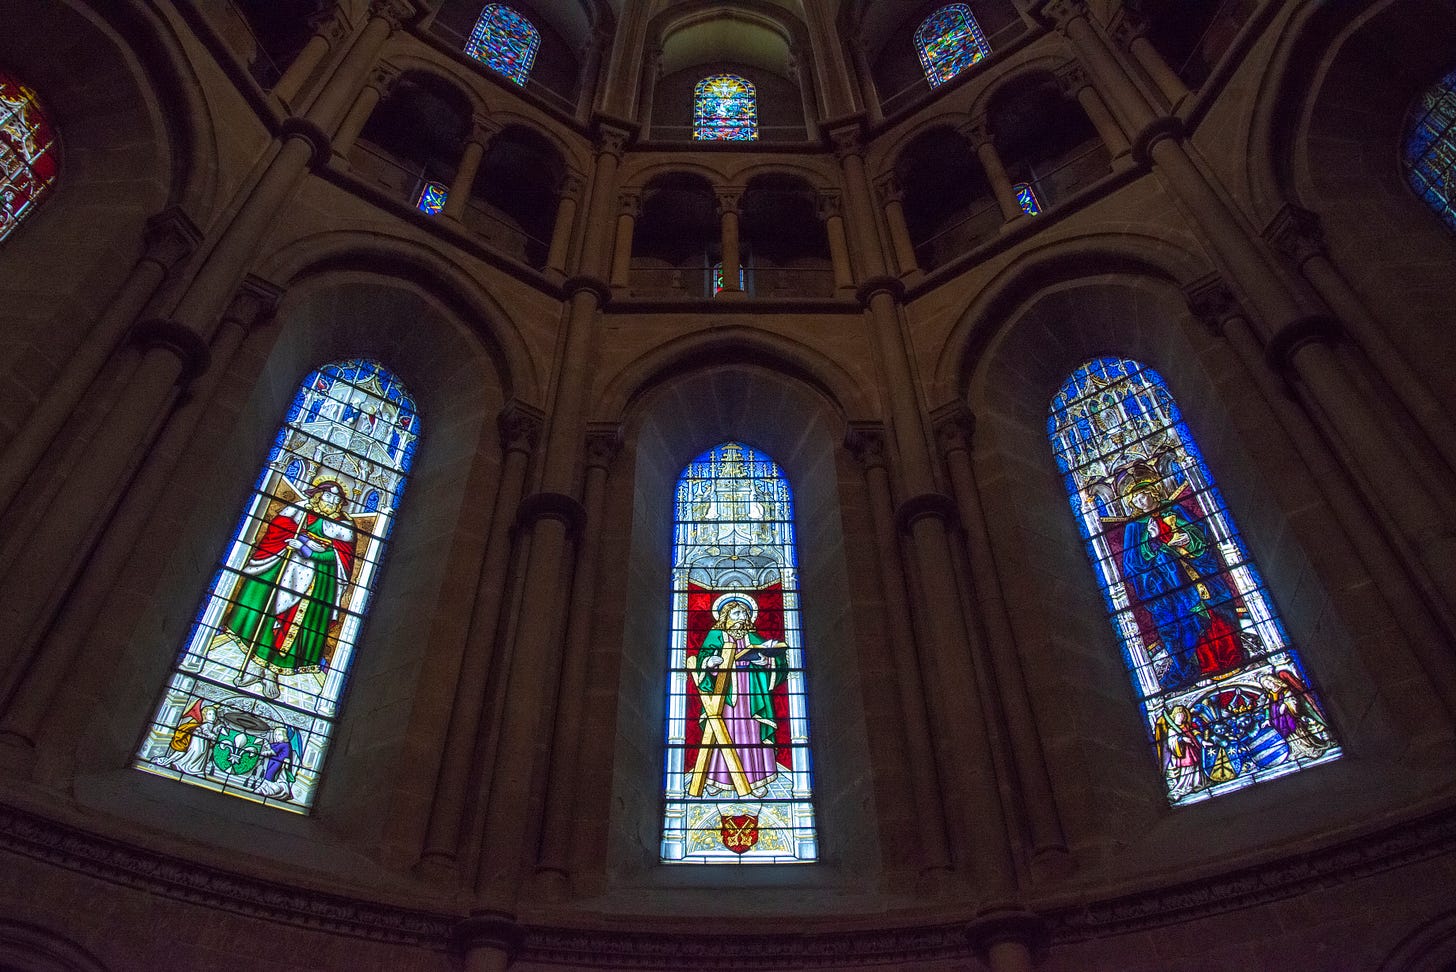 Stained glass windows in the corner of a cathedral